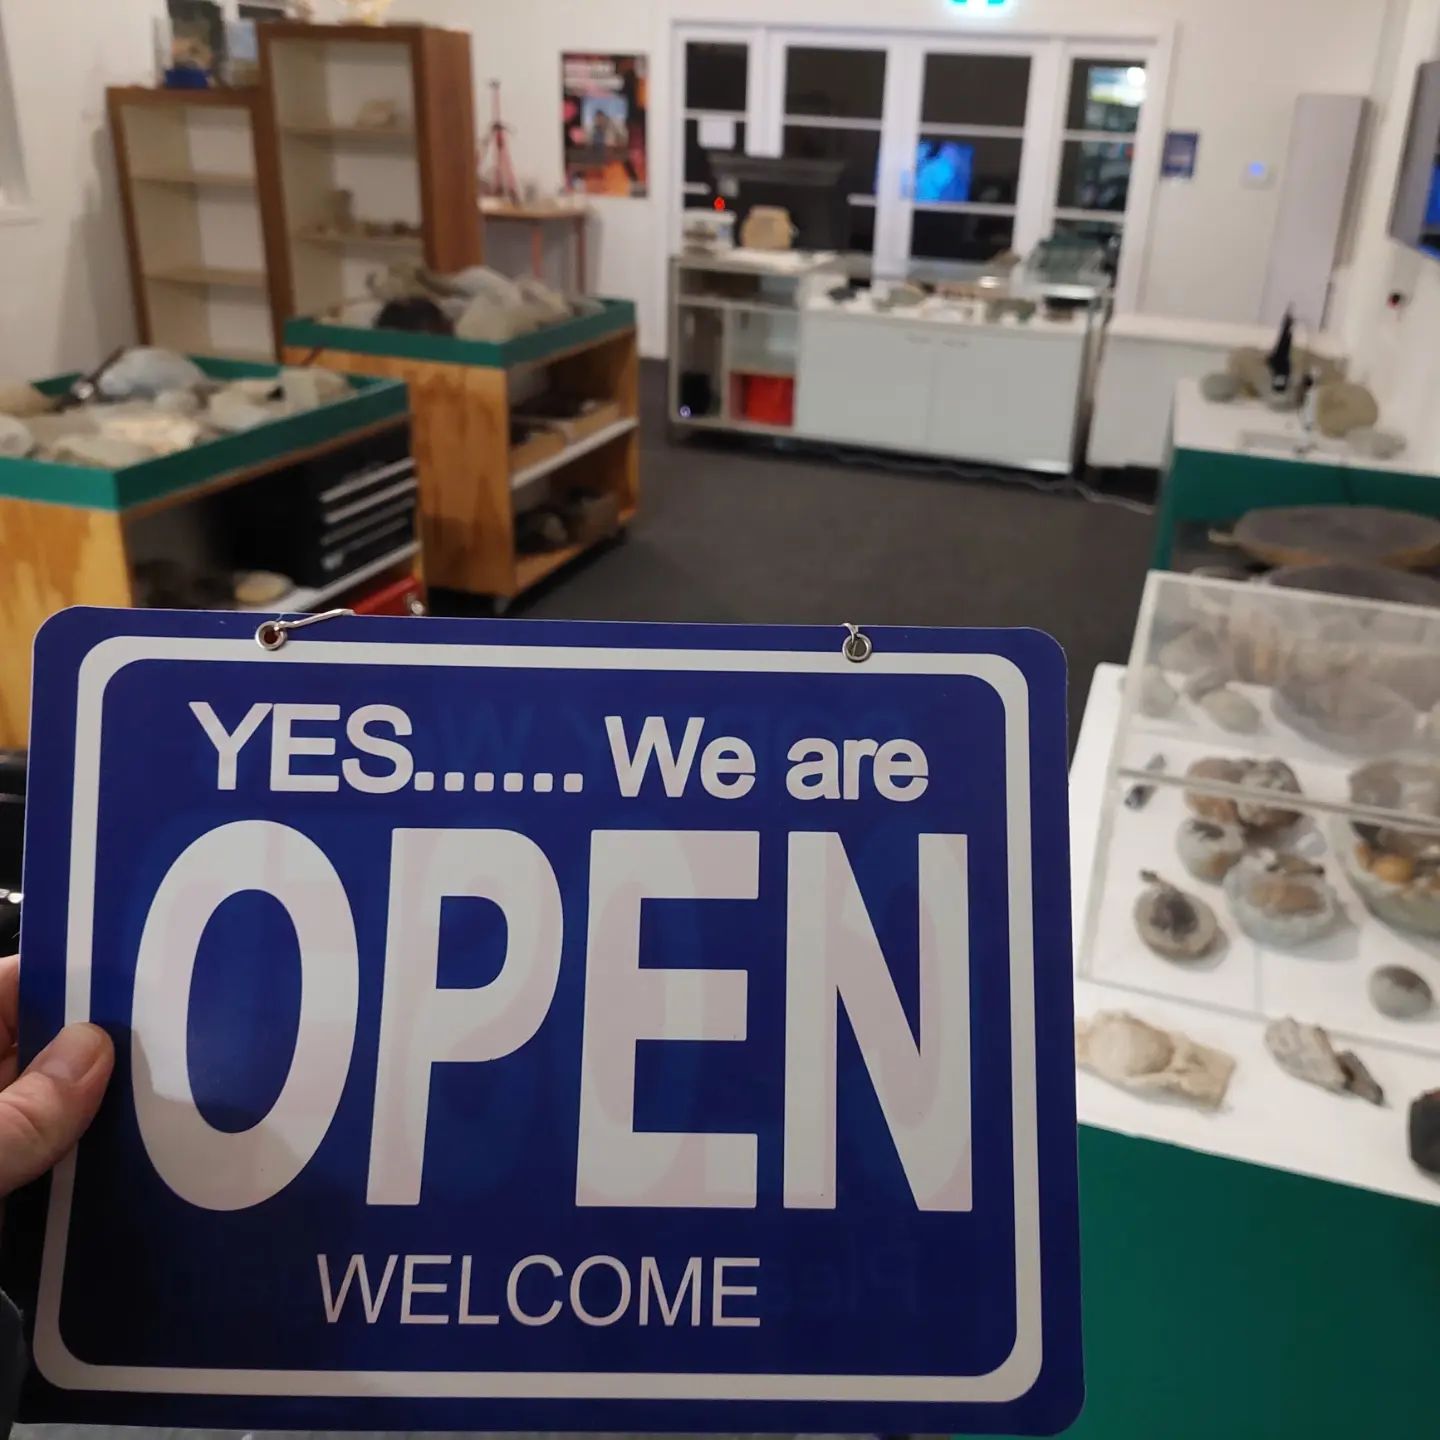 This Sat 25 May and Sun 26 May. Come and check out some of my fossil collection, there's a kids area for digging as well. I will have the turtle skull, massive crab, penguin, plesiosaur bones and many other fossils on display.
It's in Waikuku, about 30 min north of Christchurch at the Old School Collective. There's a great cafe as well if you fancy a coffee.

    